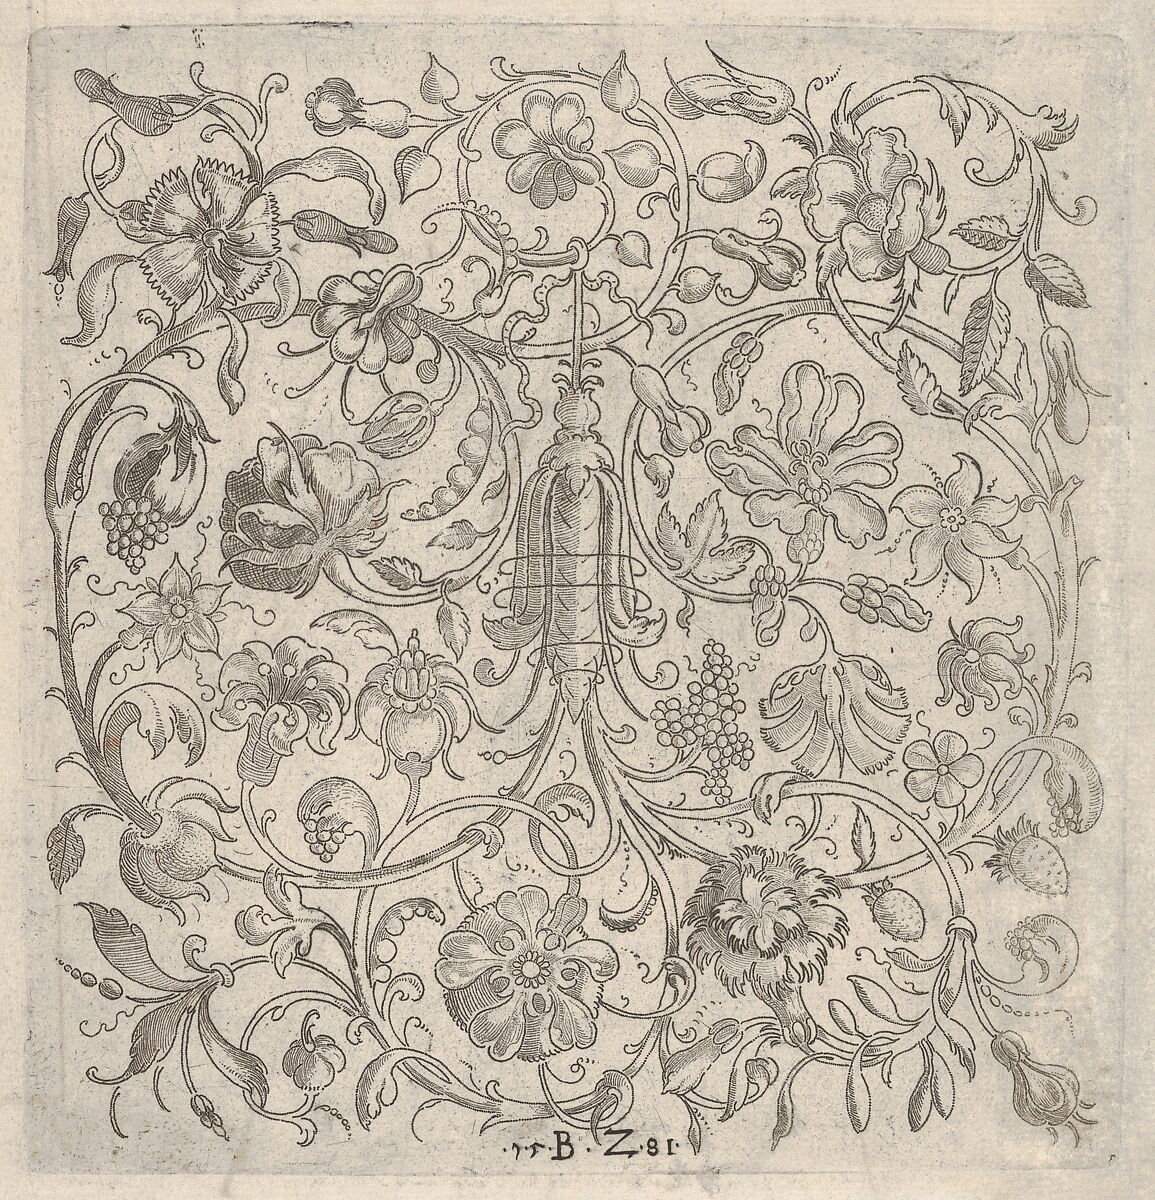 Square Panel with Vegetal Scrollwork, Flowers and Fruits, Bernhard Zan (German, active 1580–81), stipple engraving 